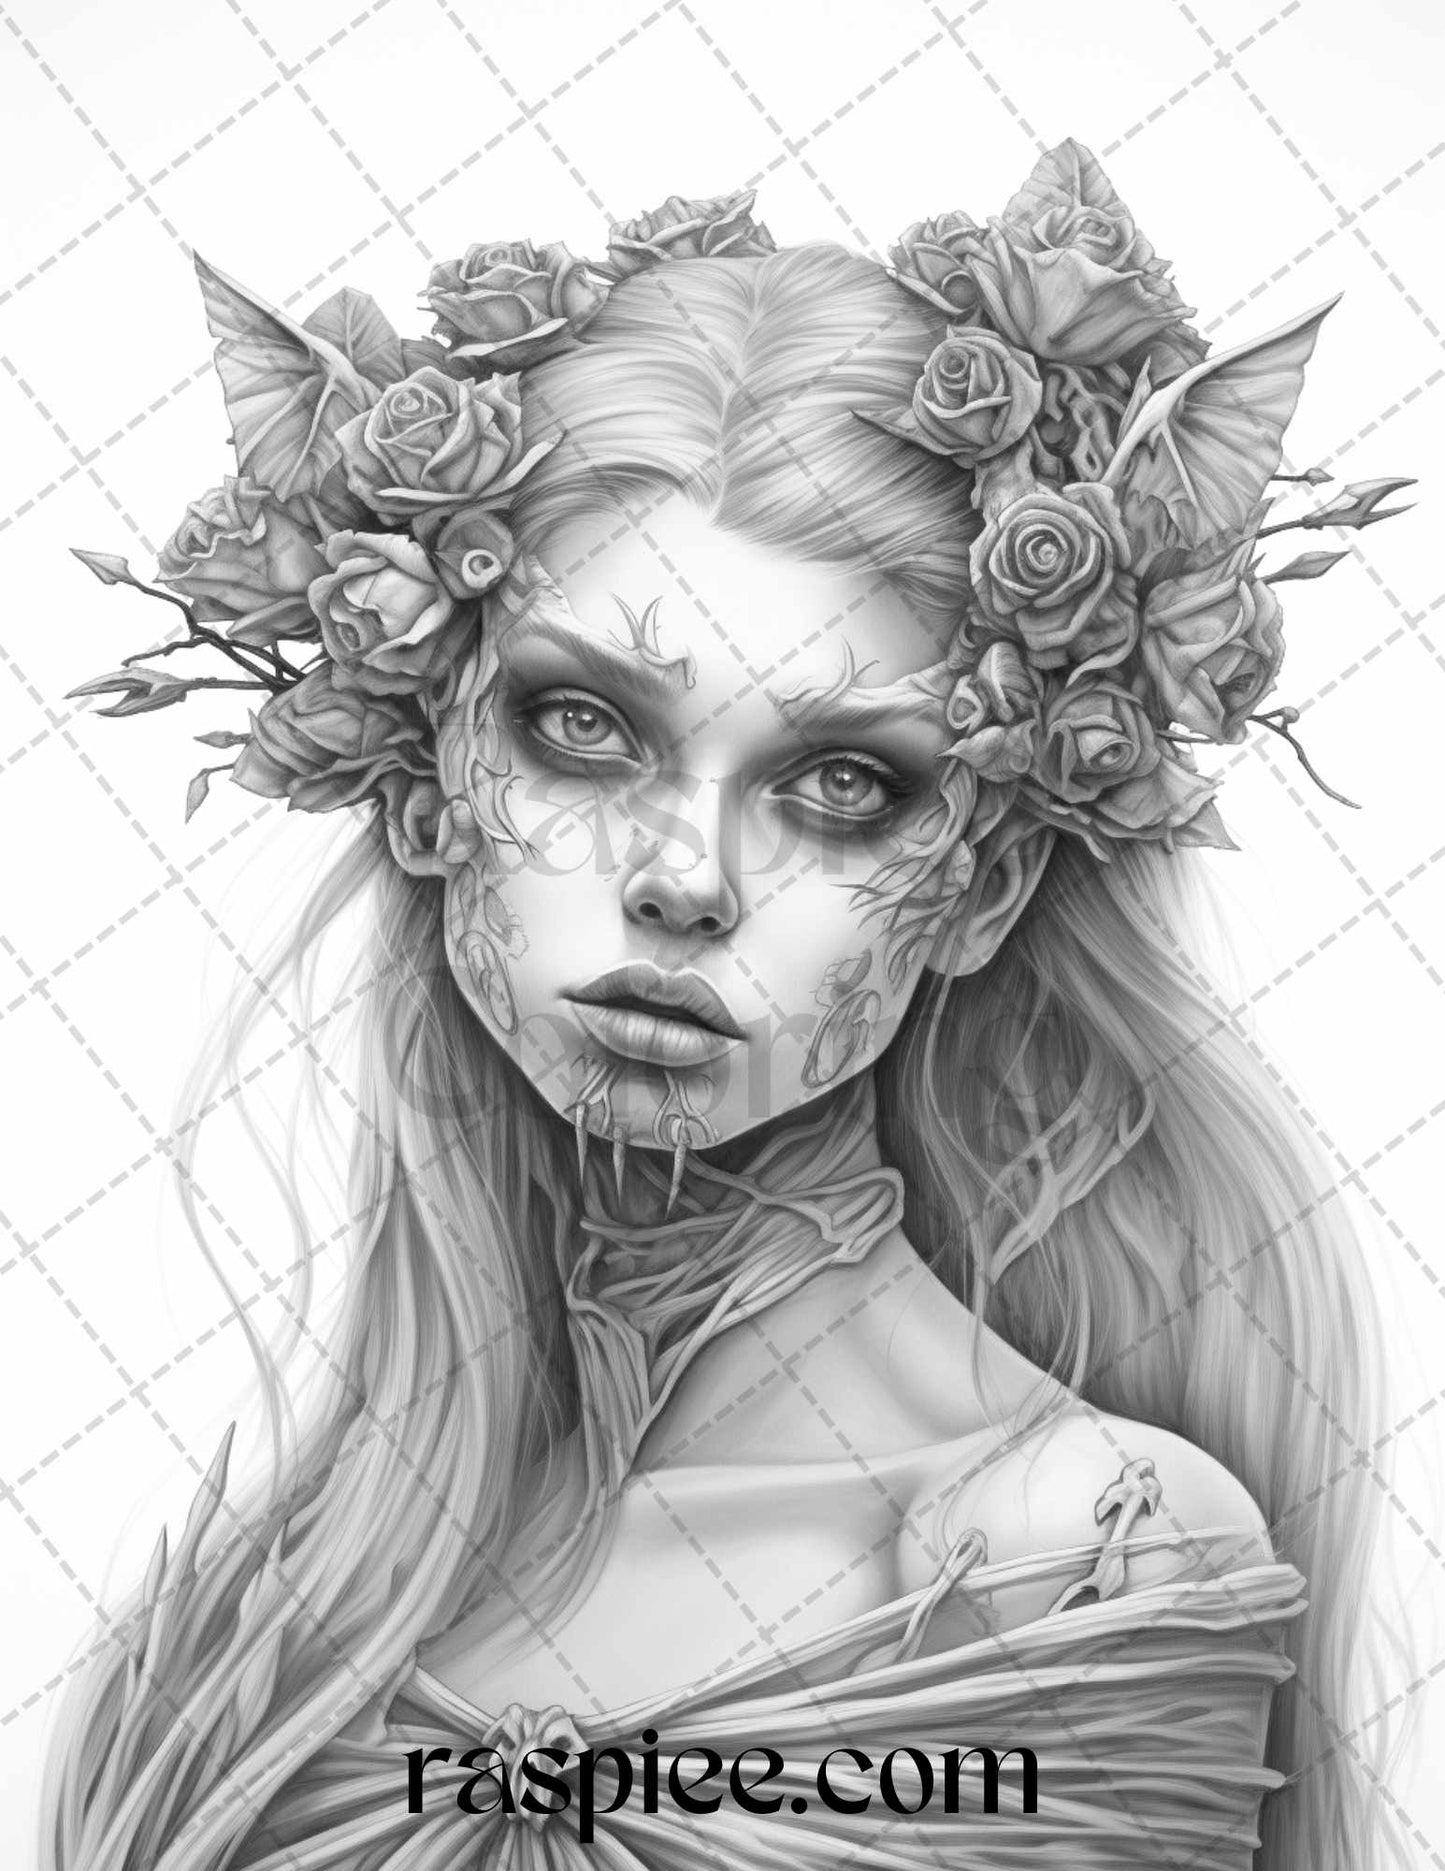 60 Halloween Zombie Fairy Grayscale Coloring Pages Printable for Adults, PDF File Instant Download